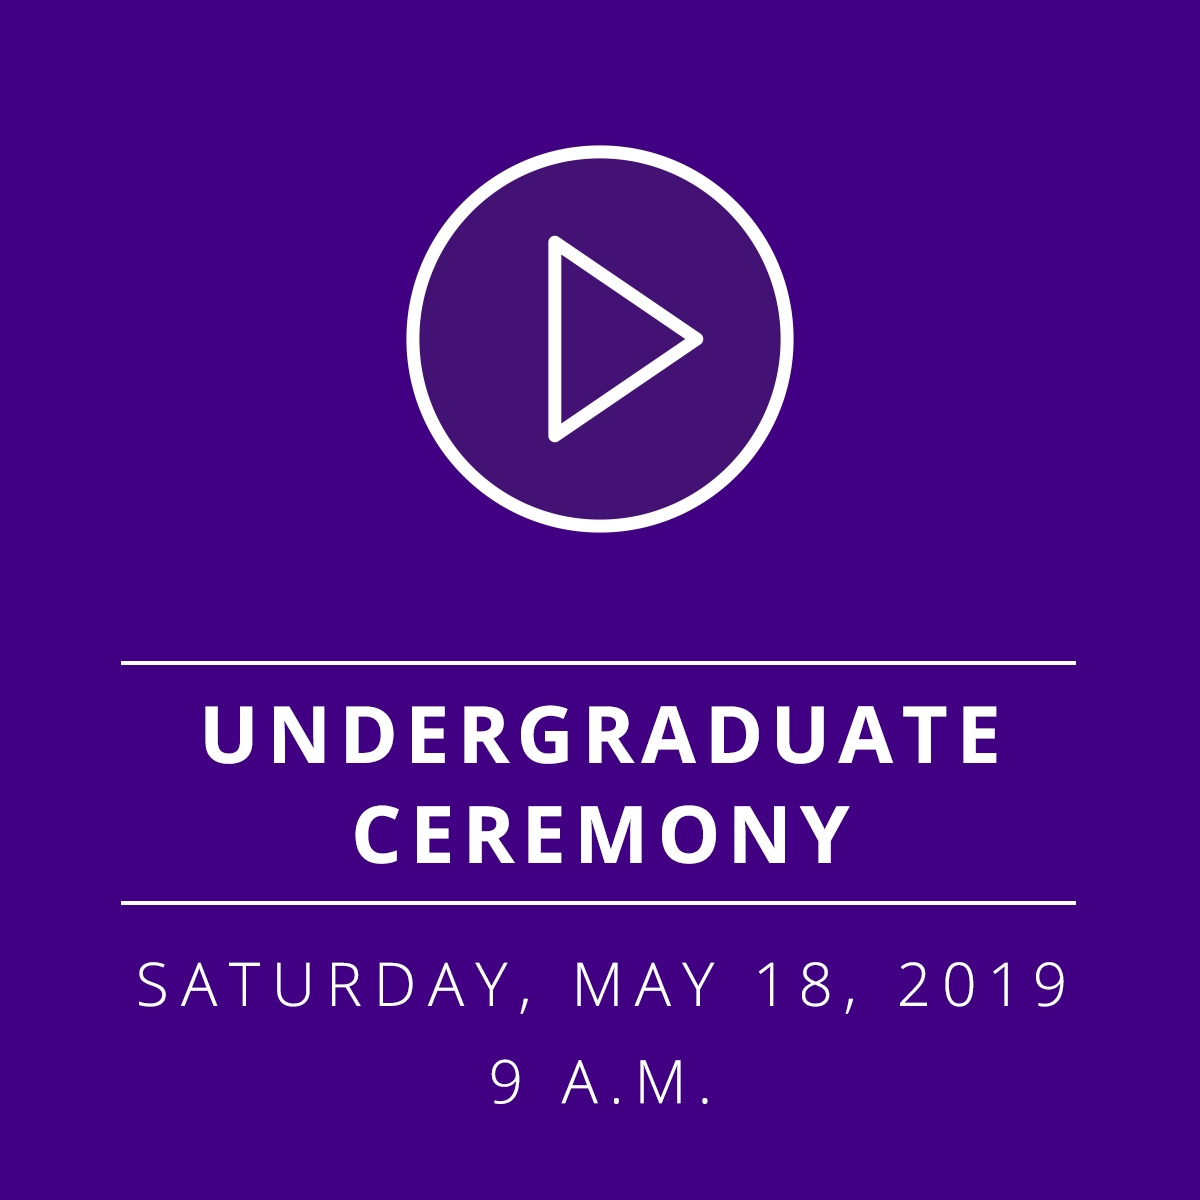 Undergraduate Commencement Ceremony - Saturday, May 18, 2019 - 9 a.m.